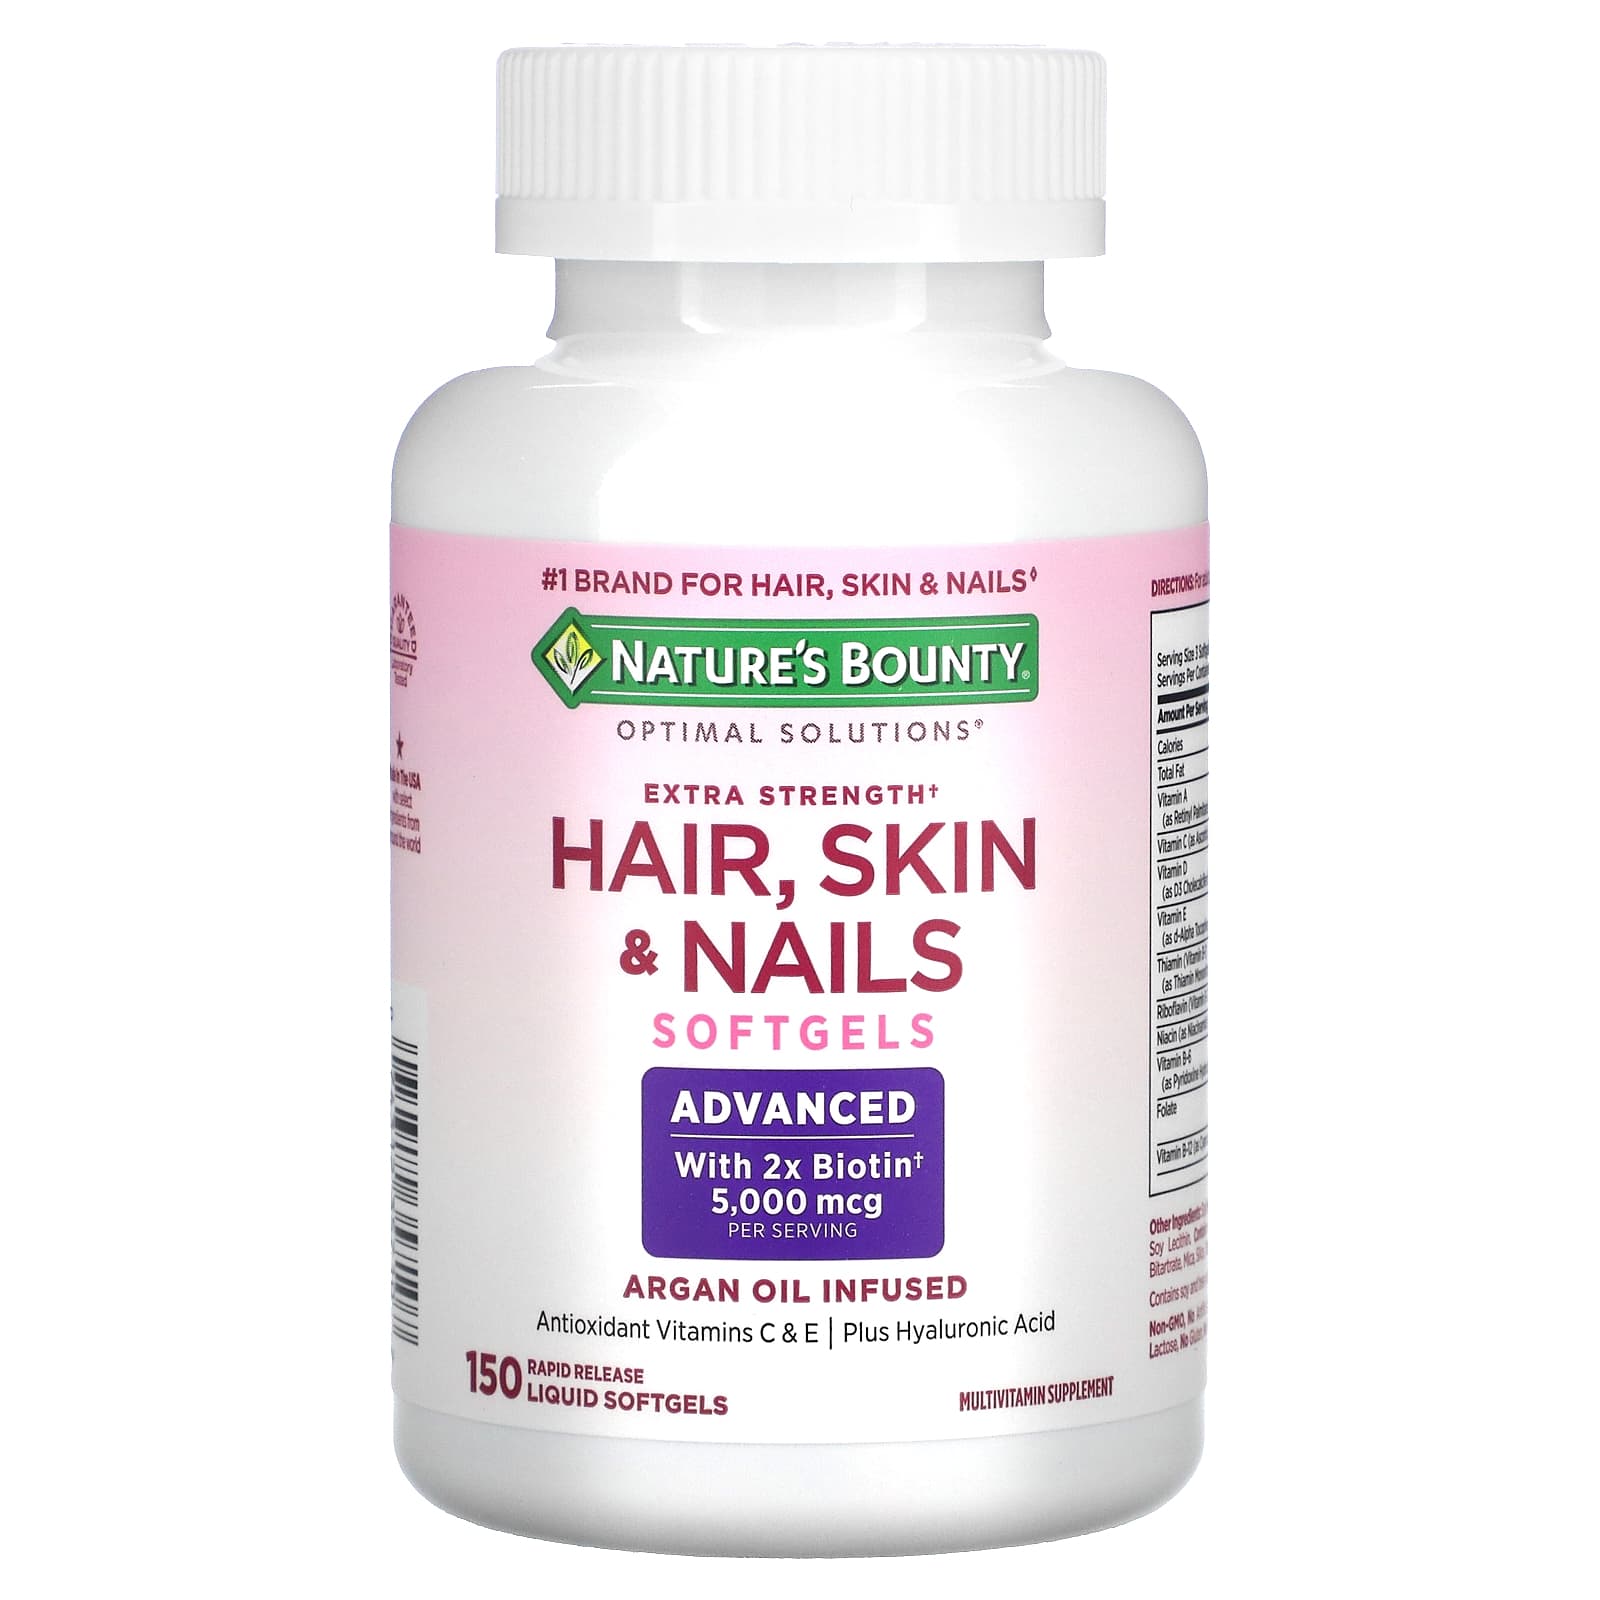 Nature's bounty extra strength hair skin and nails to promote healthy hair skin and nails - 150 Rapid release liquid softgels